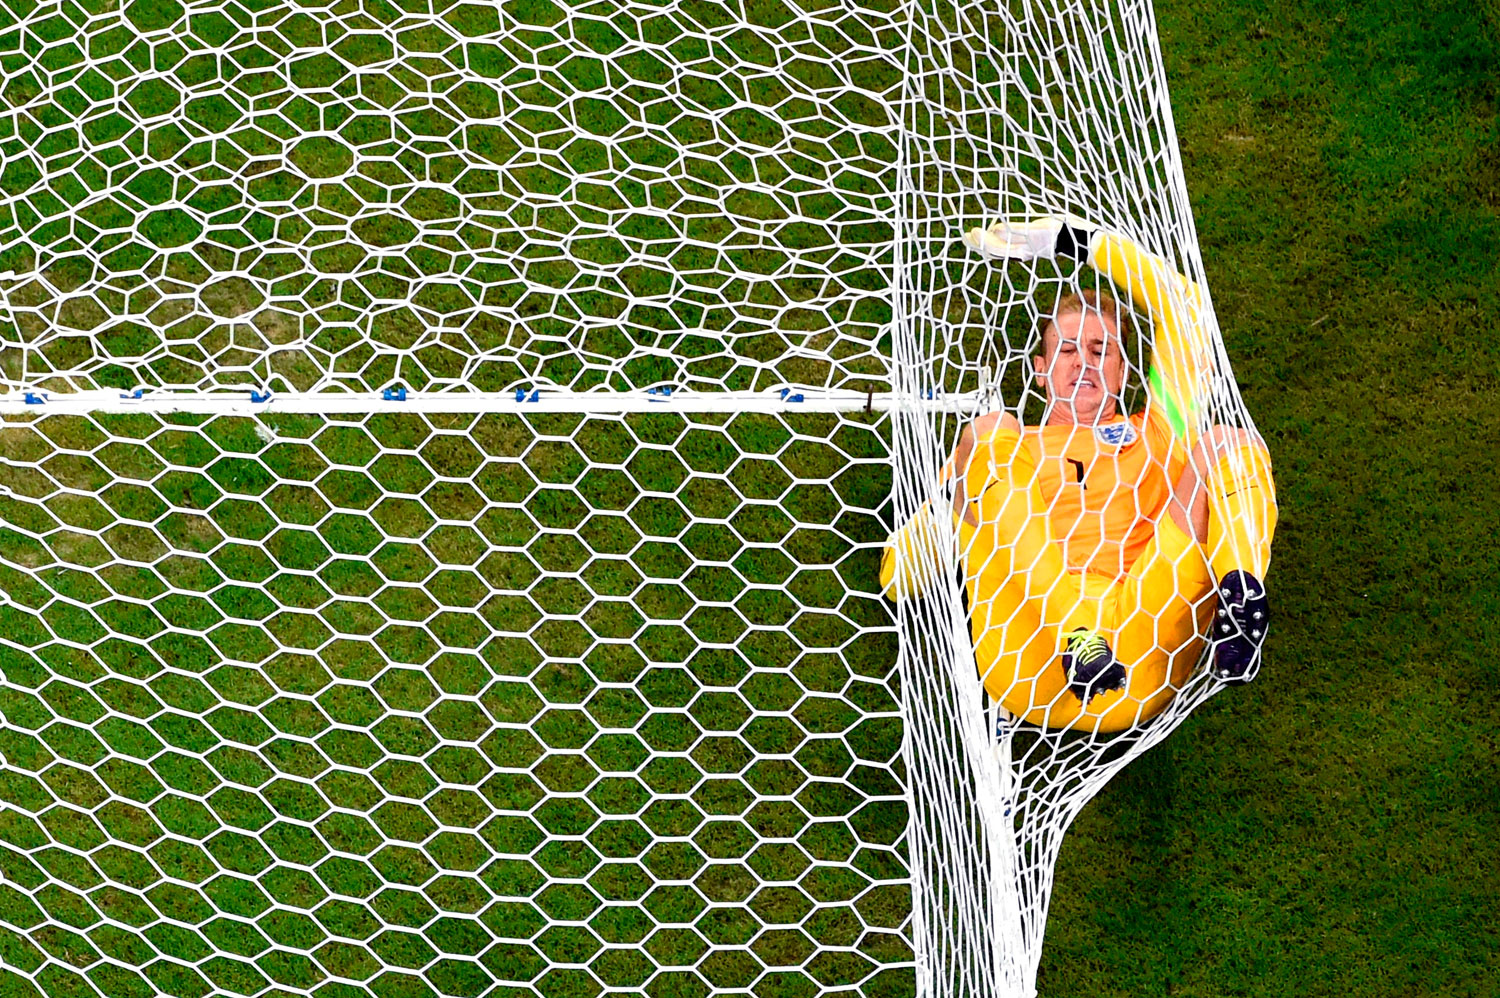 Joe Hart of England lands in the net after allowing Italy's second goal to Mario Balotelli of Italy during the match between England and Italy at Arena Amazonia on June 14, 2014 in Manaus, Brazil.